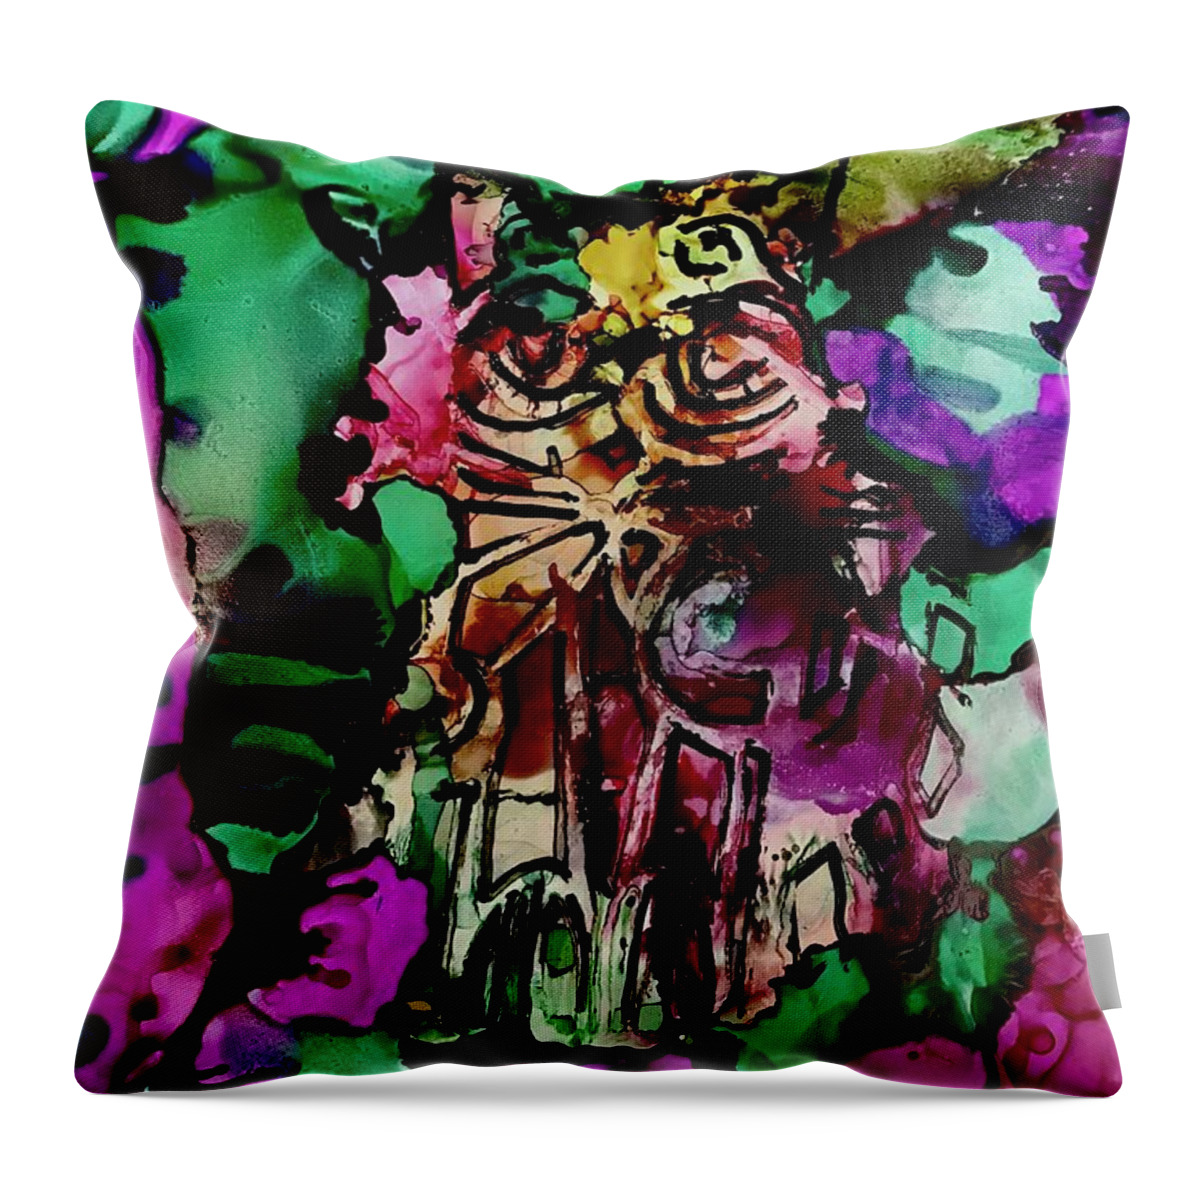 Alcohol Ink Throw Pillow featuring the painting Meow by Tommy McDonell